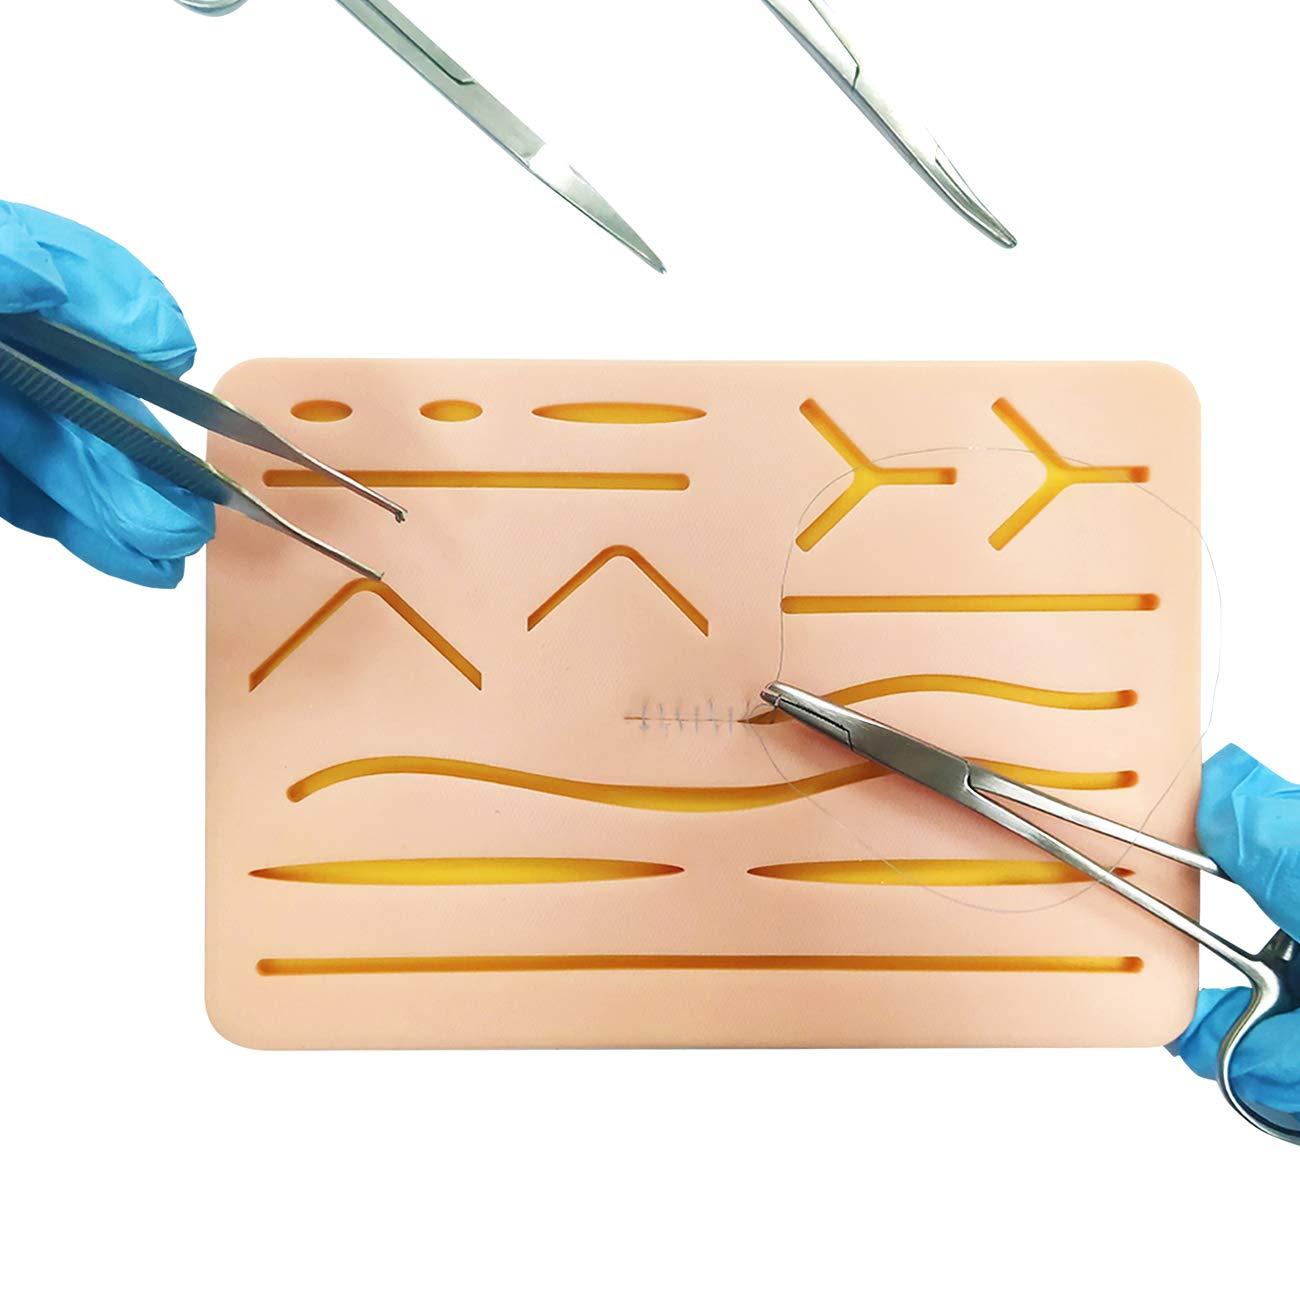 Ultrassist Suture Kit for Medical Students, Ultra-Large Stitching